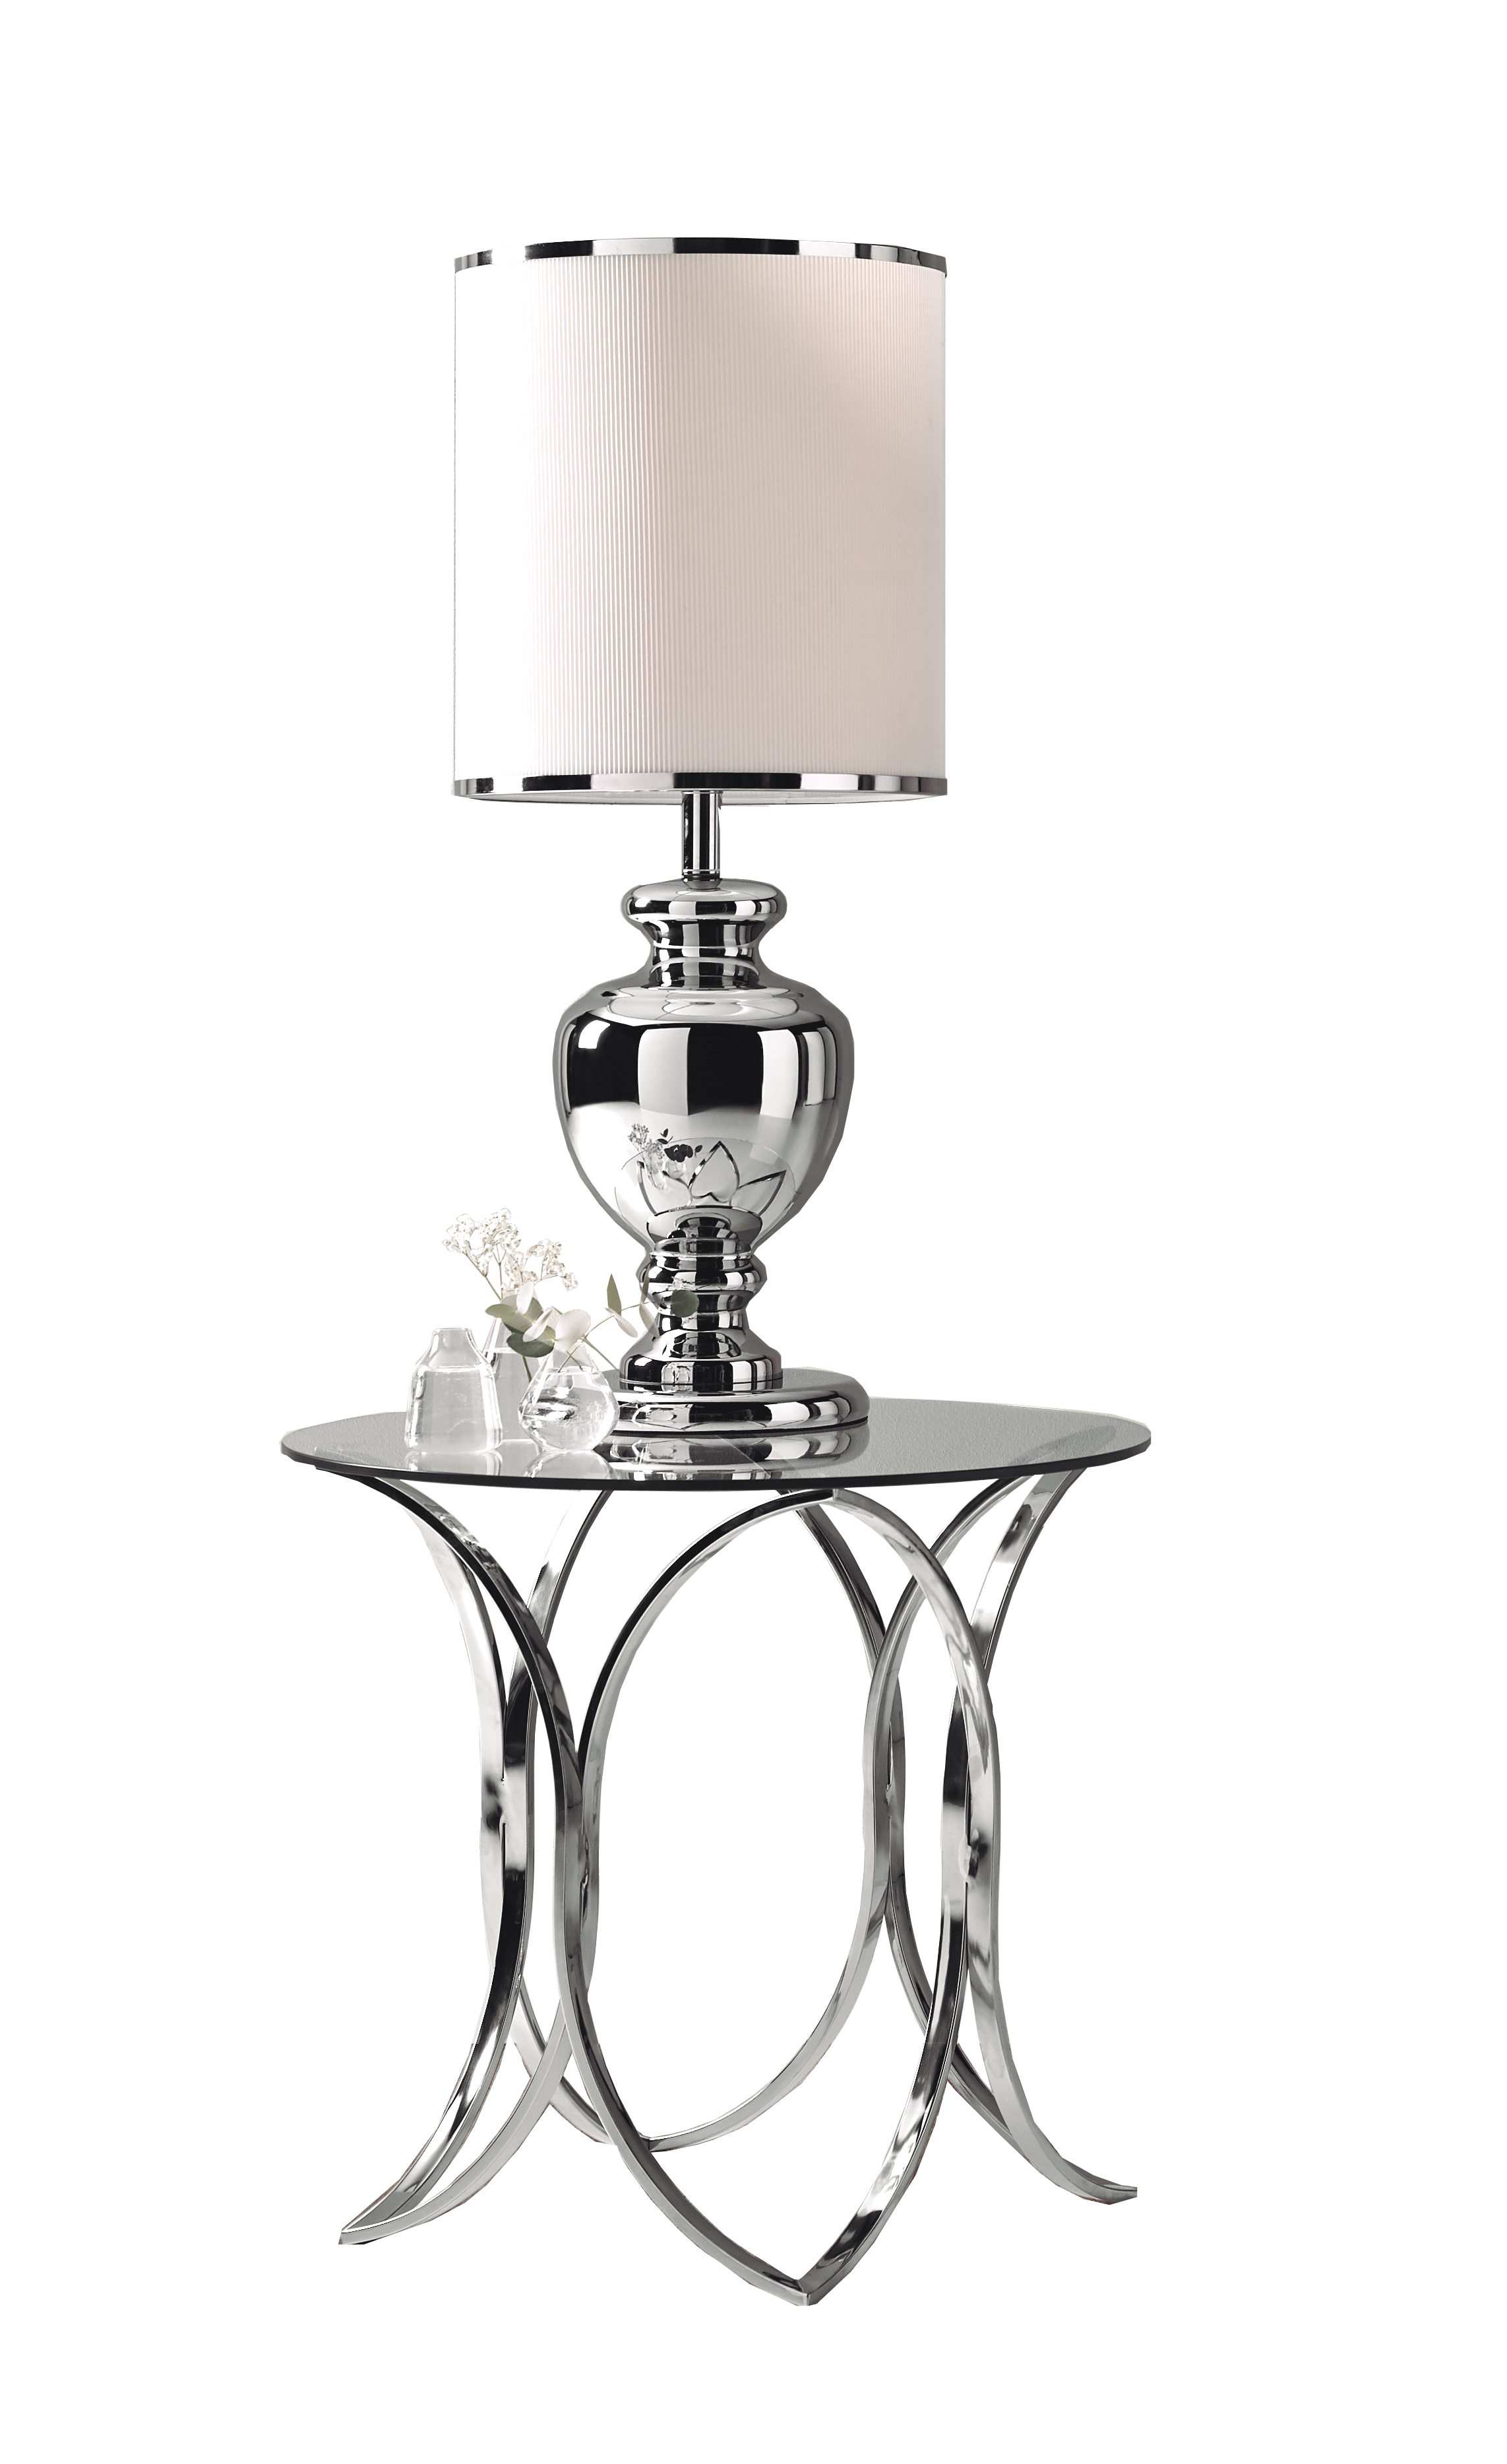 Brands Dupen Dining Rooms, Spain CT-234 Coffee Table, LT-2294-C1W Table Lamp